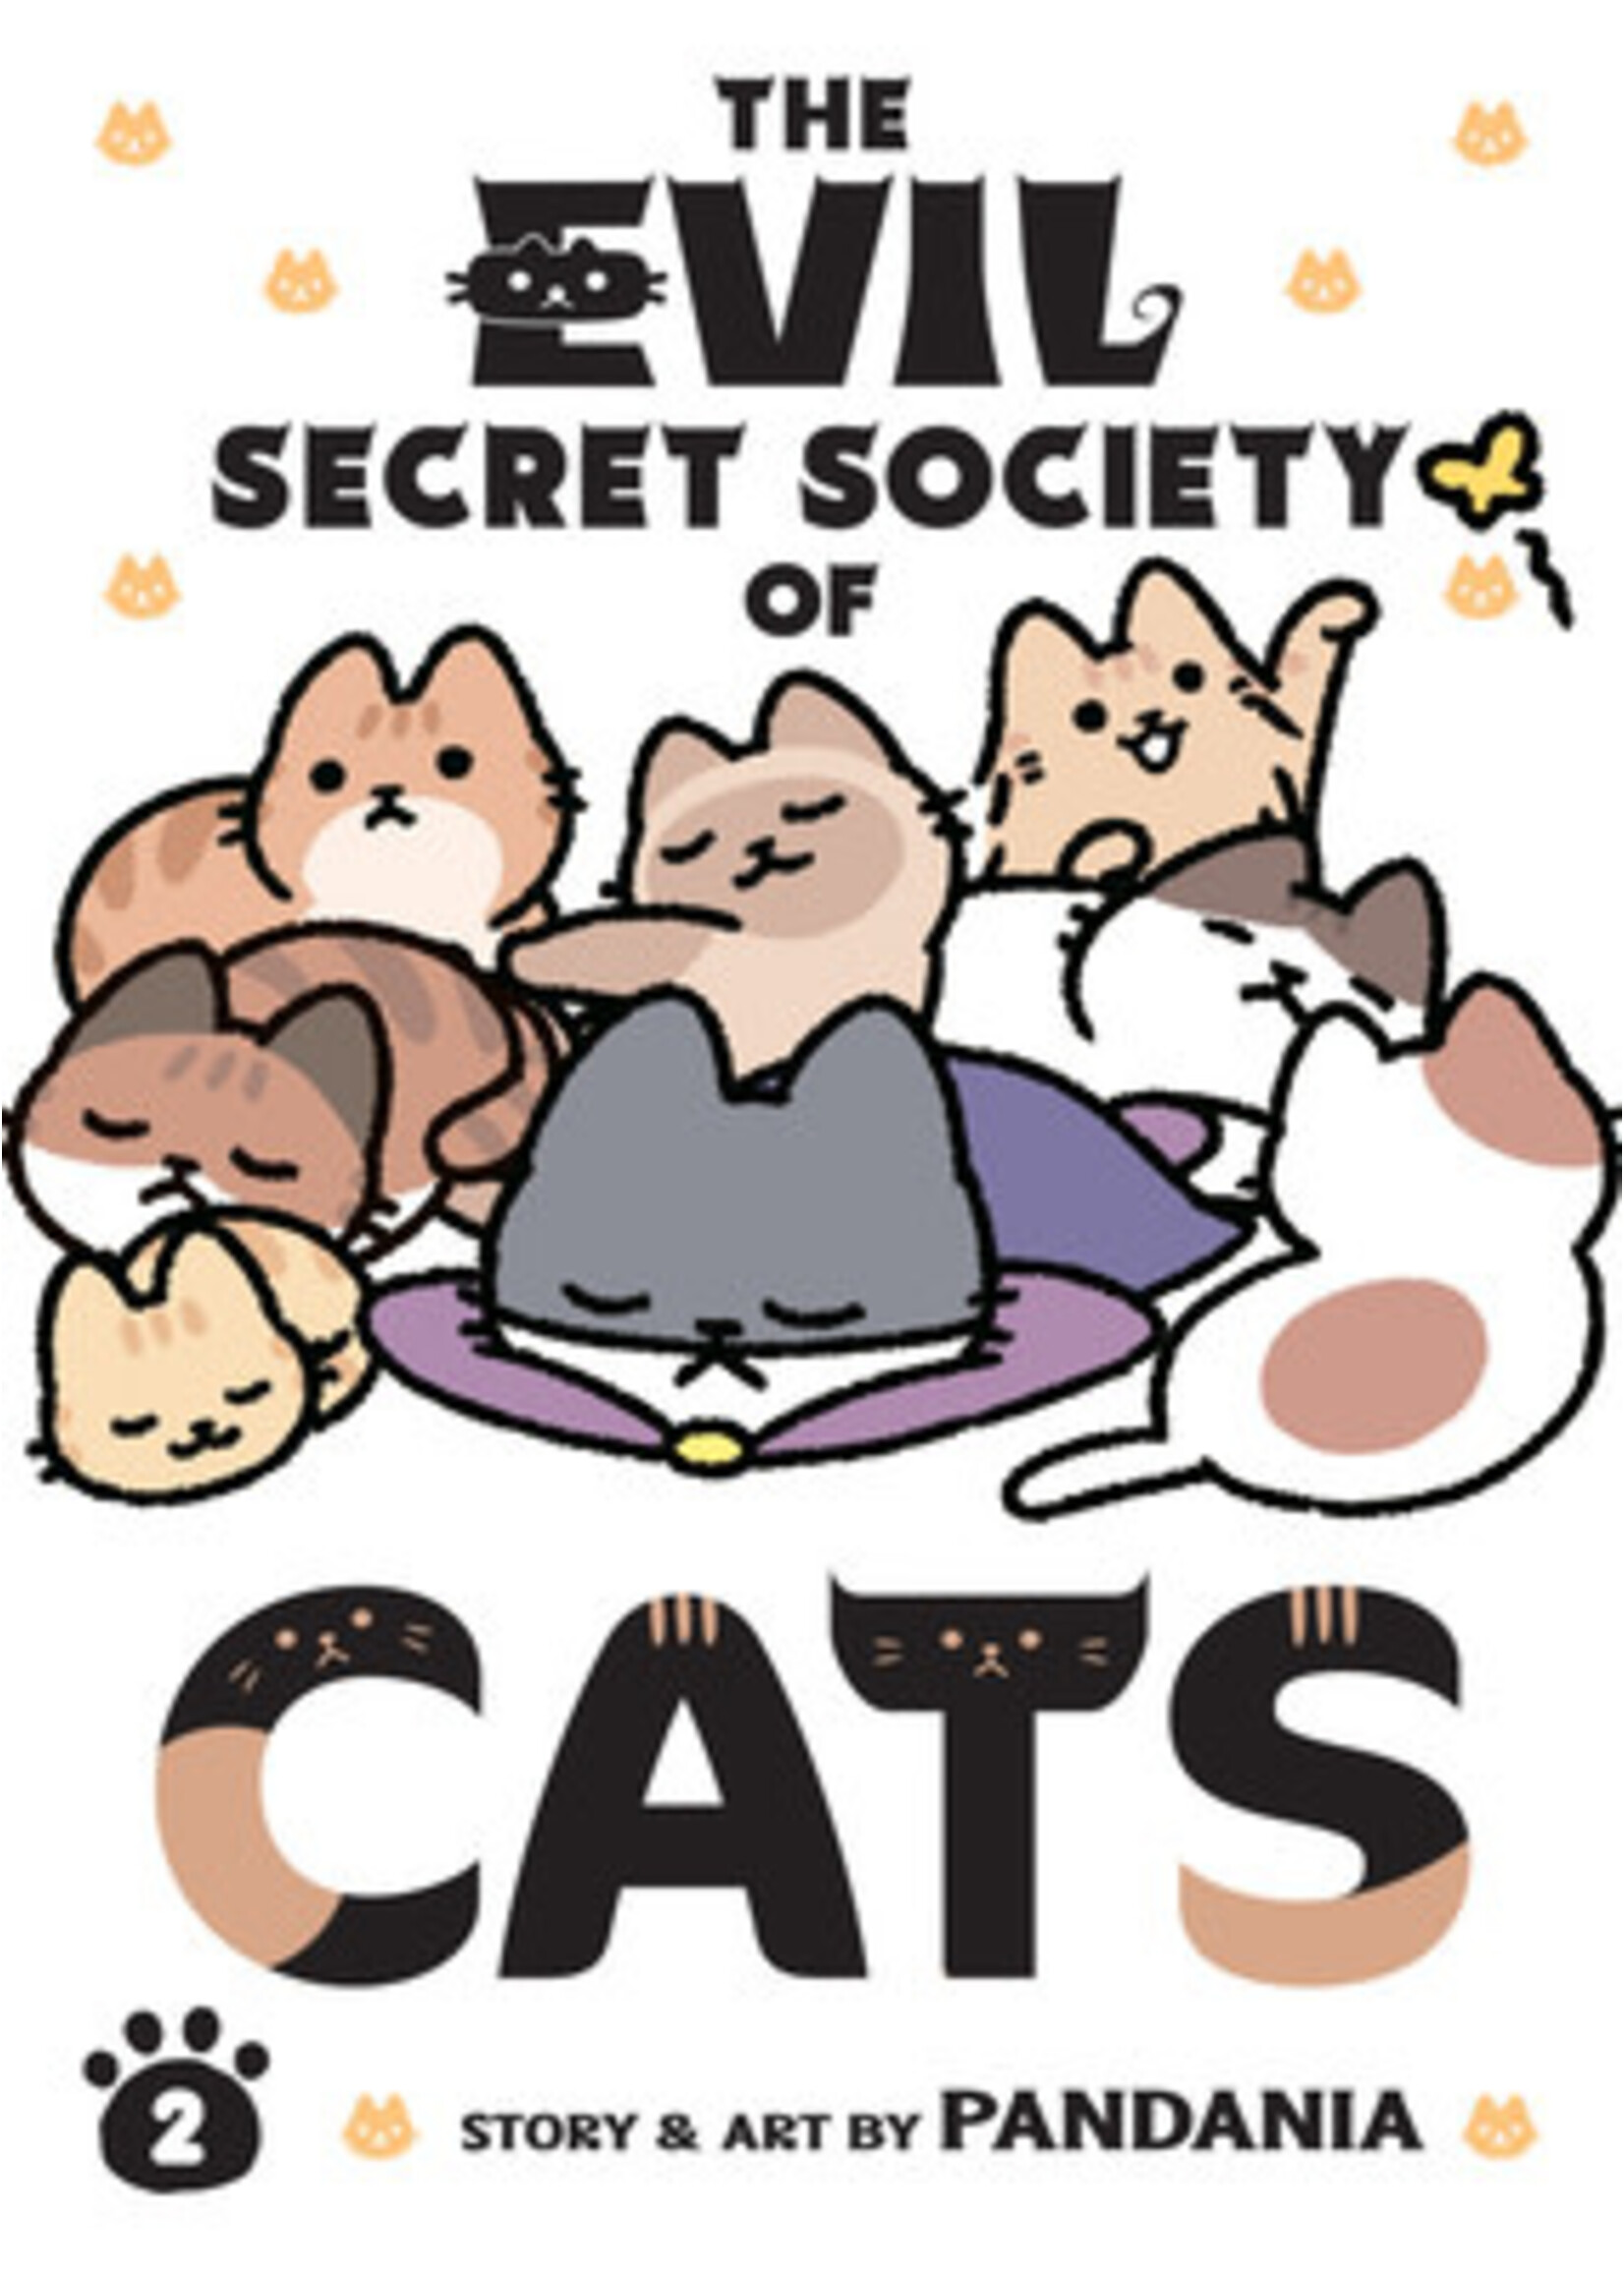 The Evil Secret Society of Cats, Vol. 2 by PANDANIA